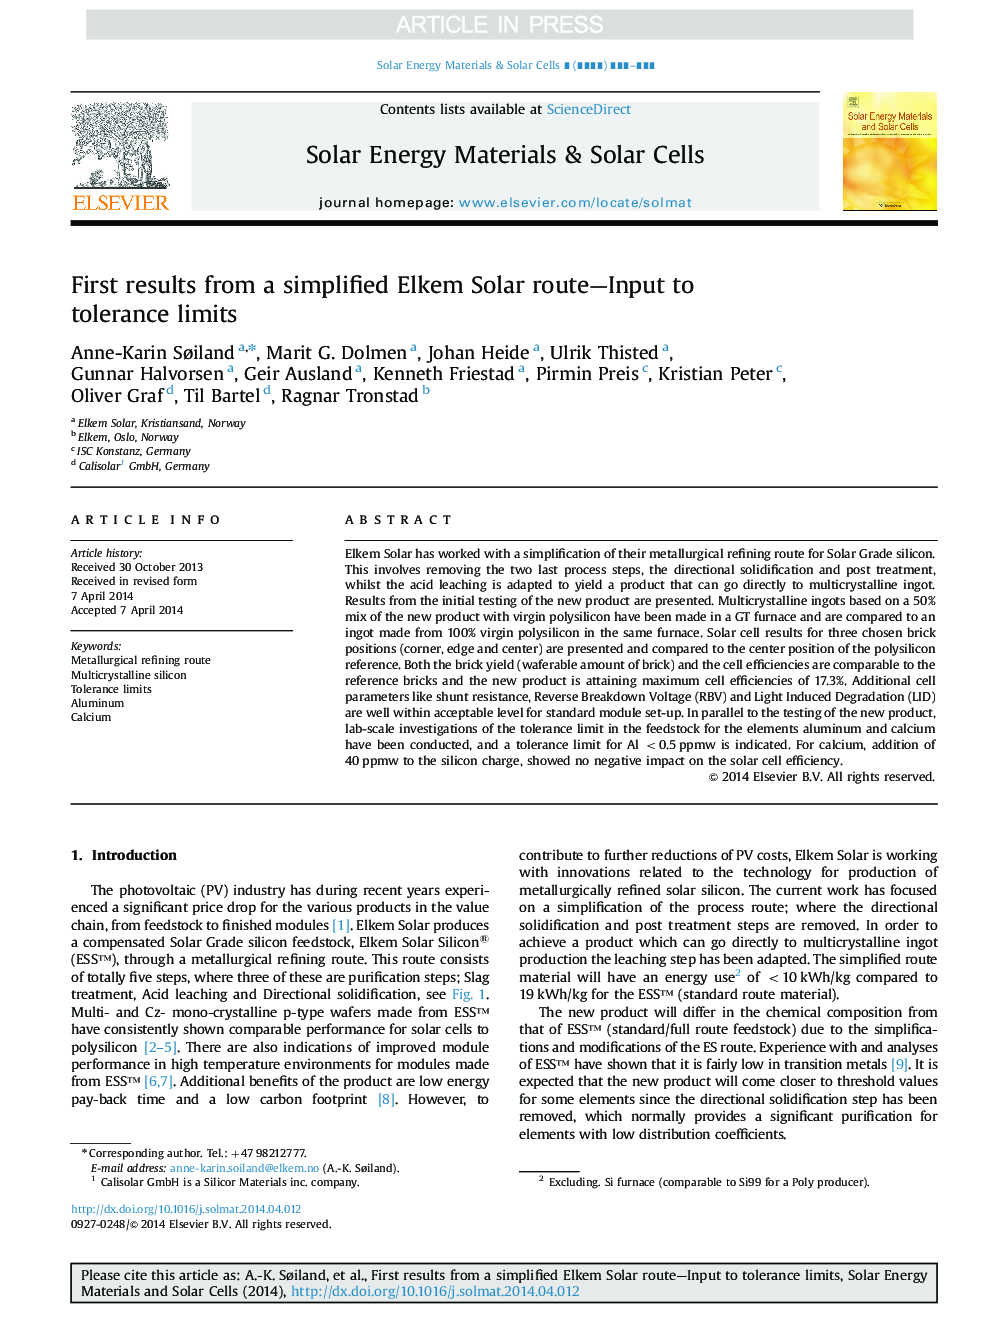 First results from a simplified Elkem Solar route-Input to tolerance limits